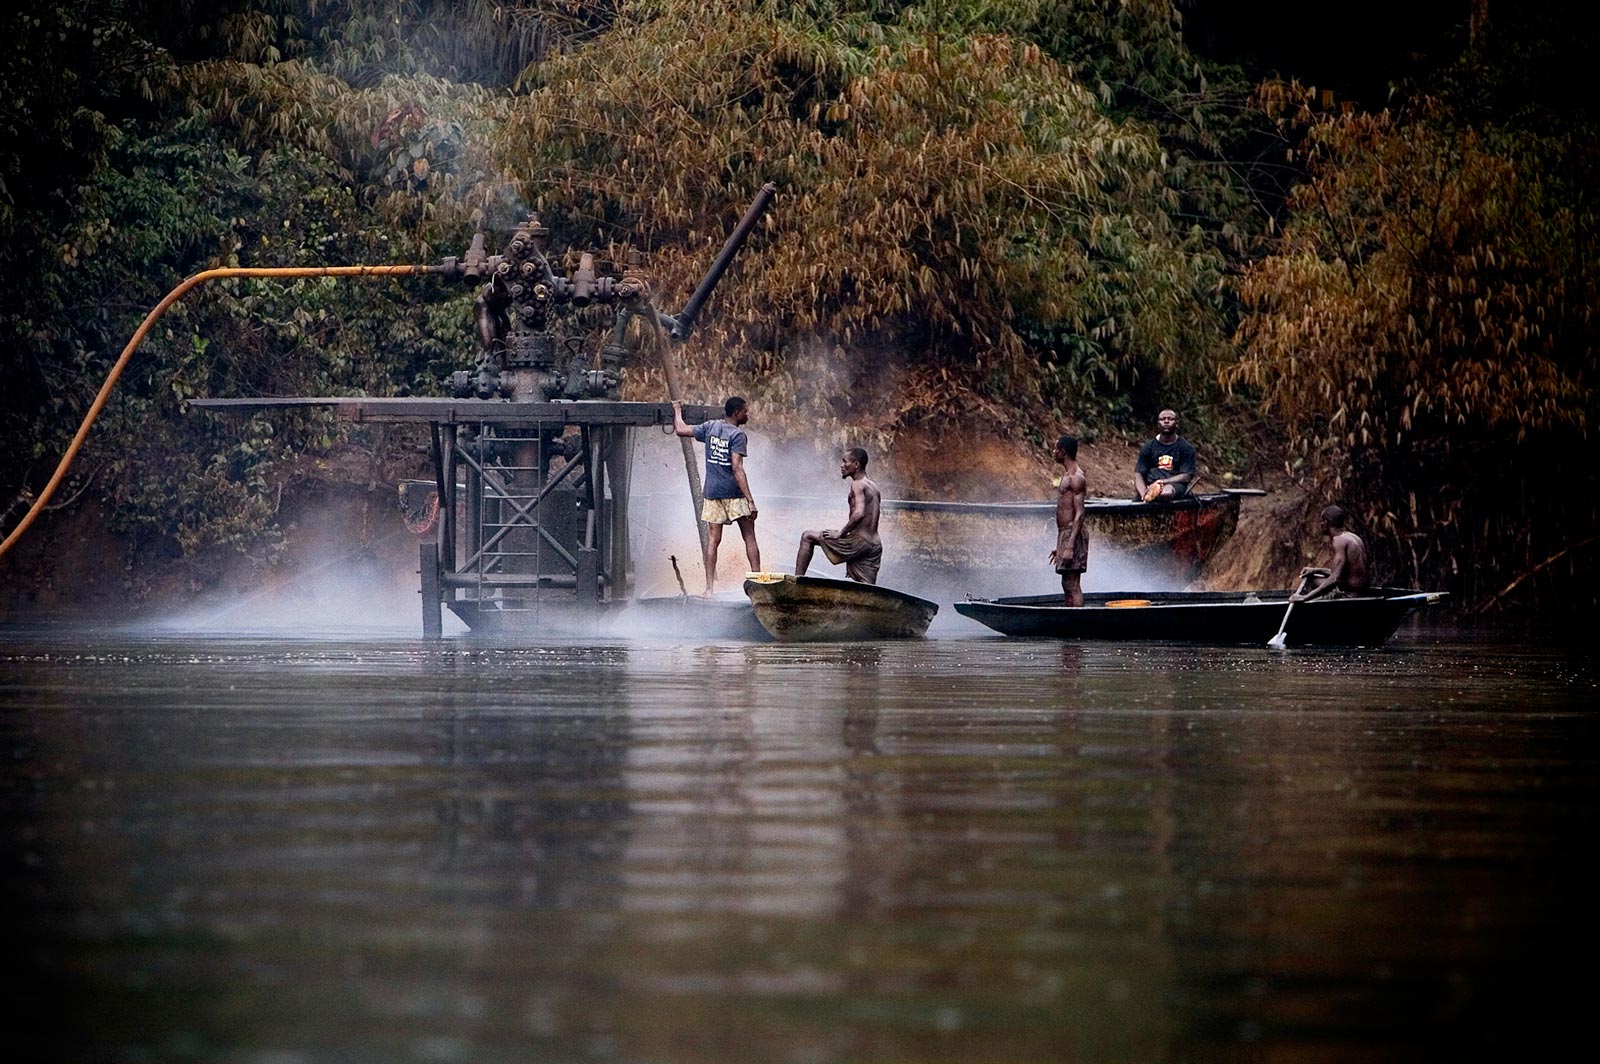 FILE: In 2009, Bolo creek, the villagers are bunkering the oil from Shell facilities and refining it to sell it on the black market. (Photo Credit: Veronique de Viguerie/ Getty Images)